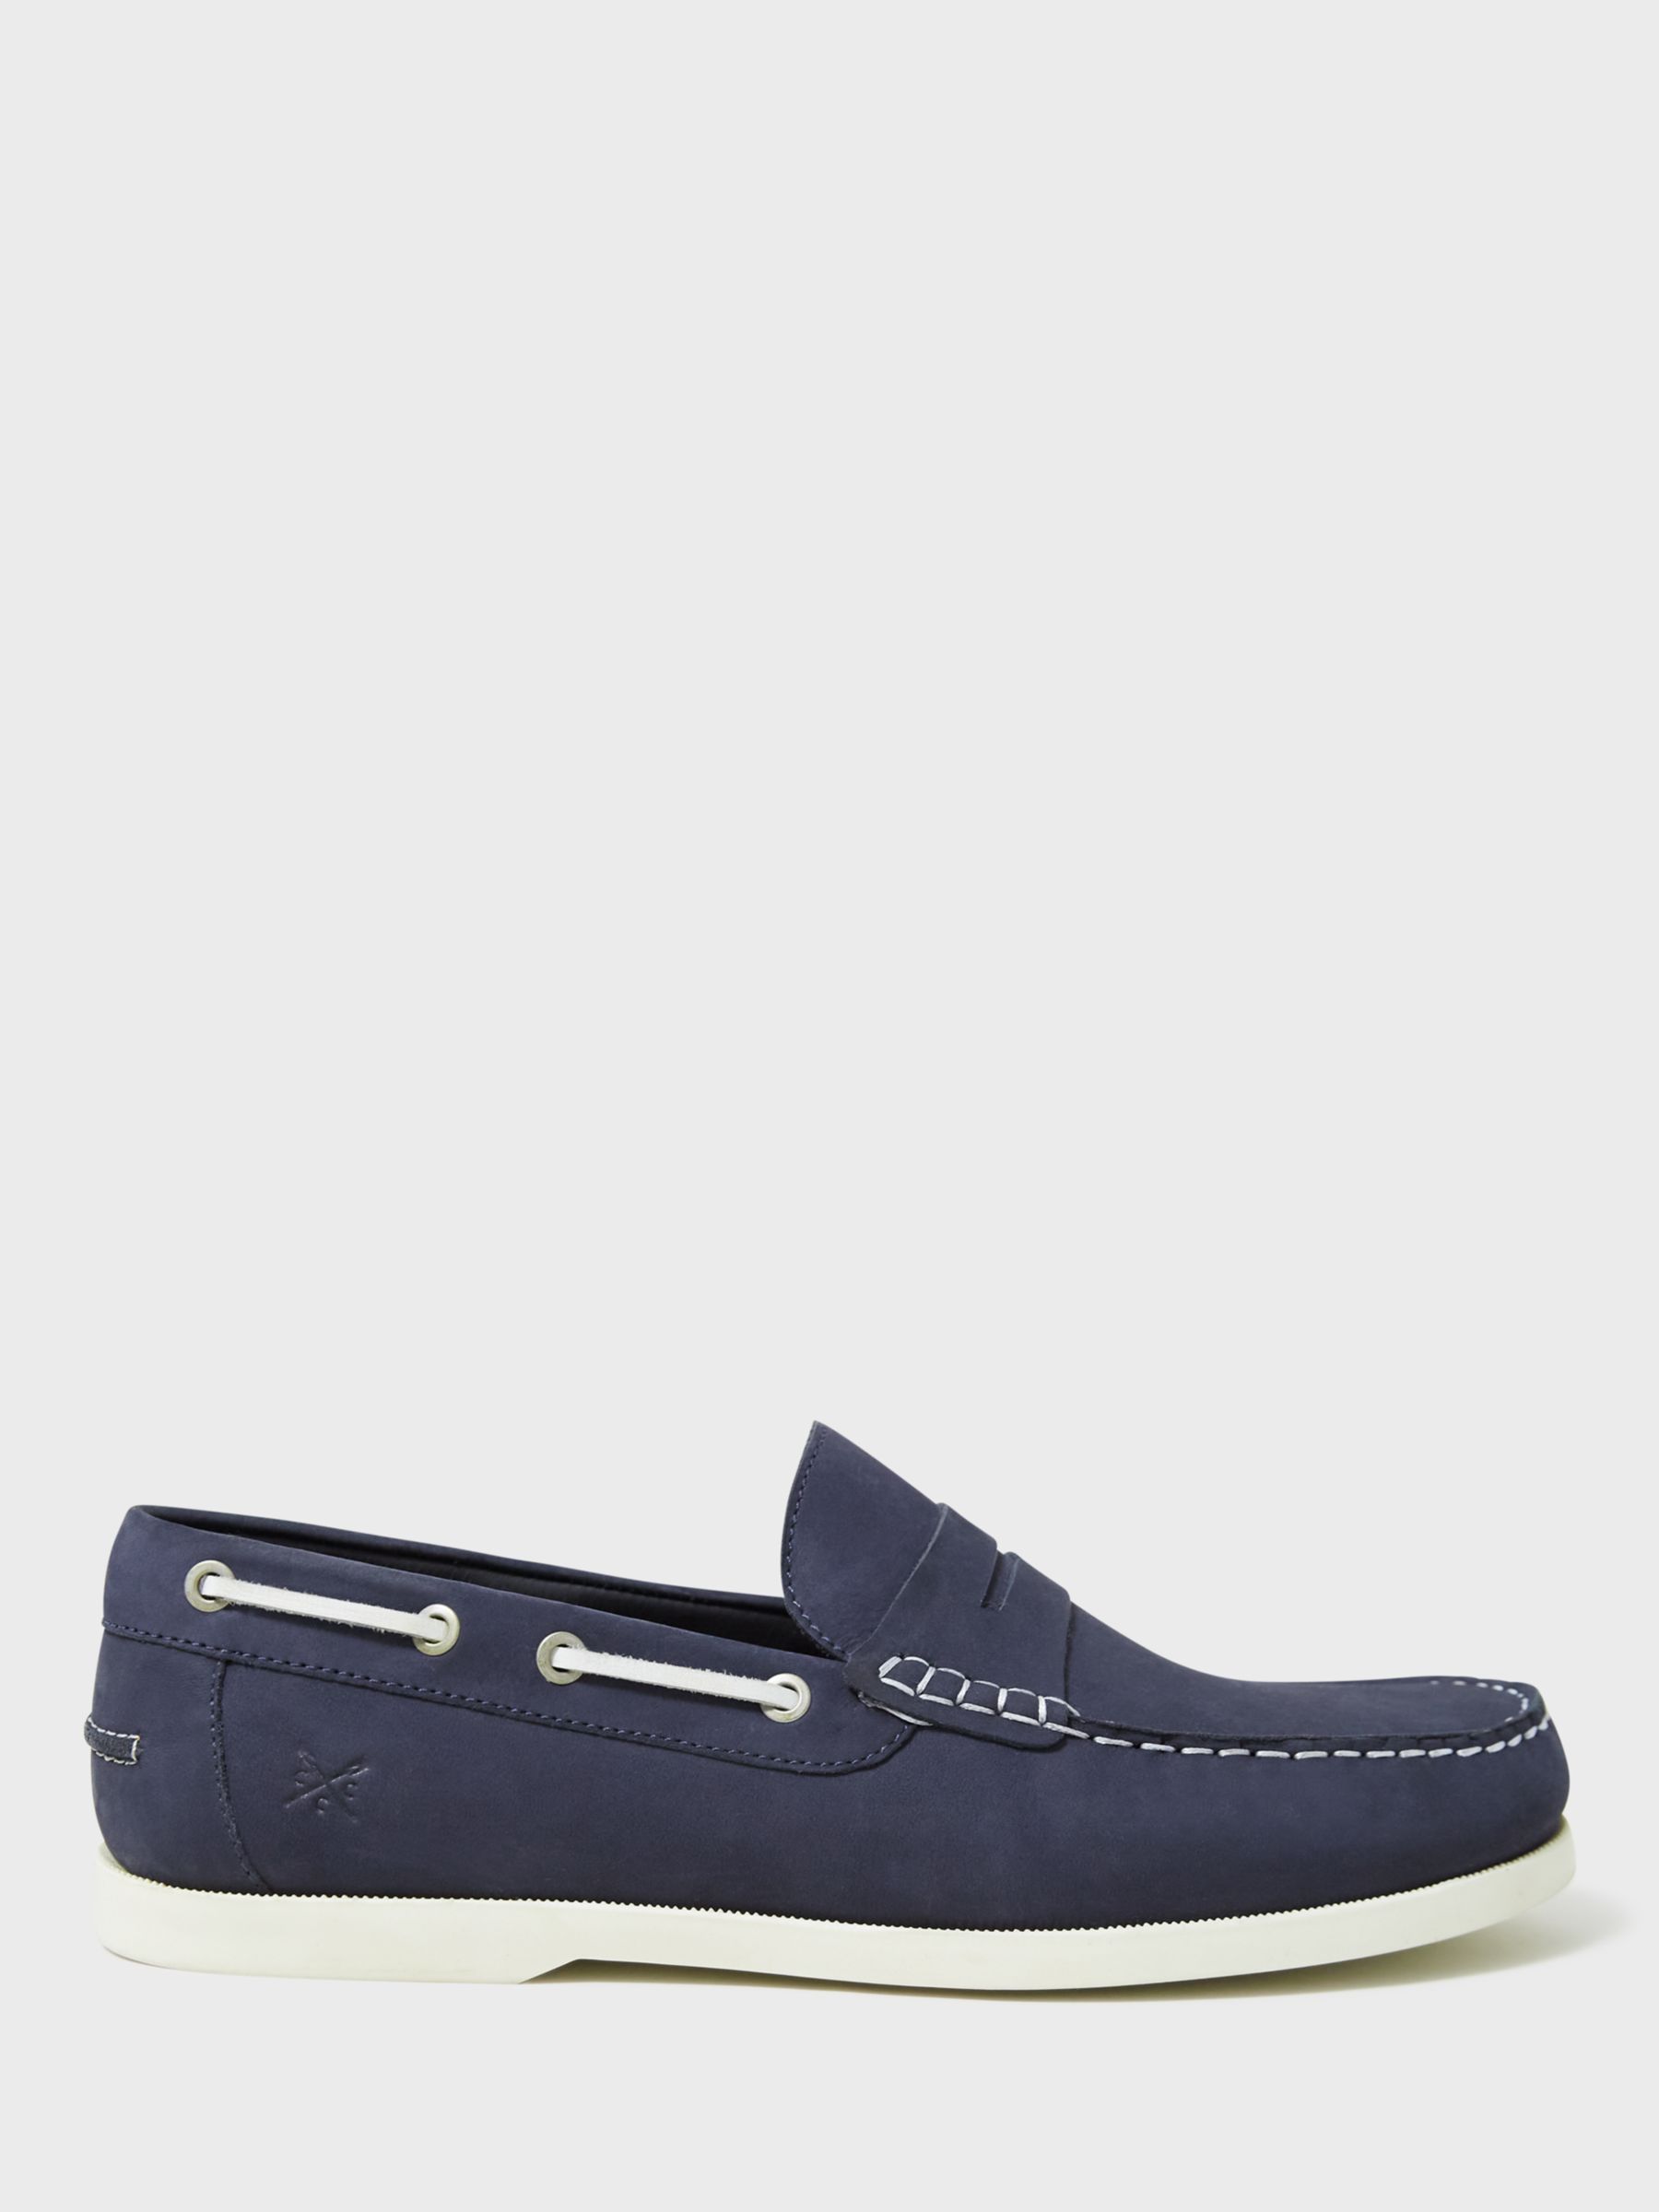 Crew Clothing Slip On Classic Deck Shoes, Navy Blue, 11.5